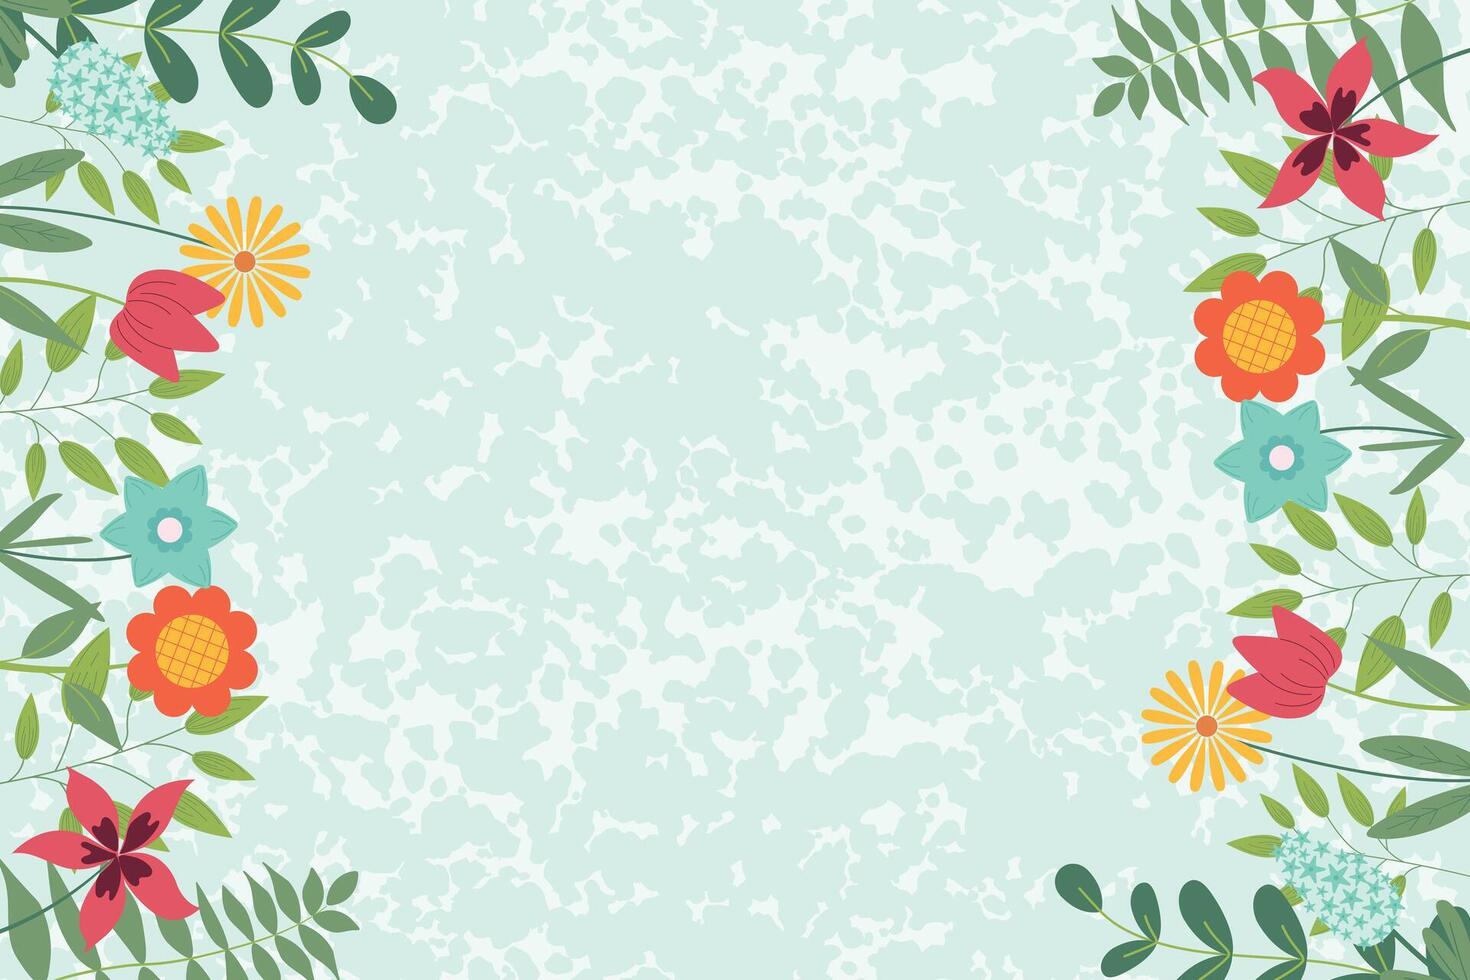 Hand sketched background, illustration. Borders with leaves and flowers for greeting card, invitation template in pastel colors with texture on background. Retro, poster, background. vector